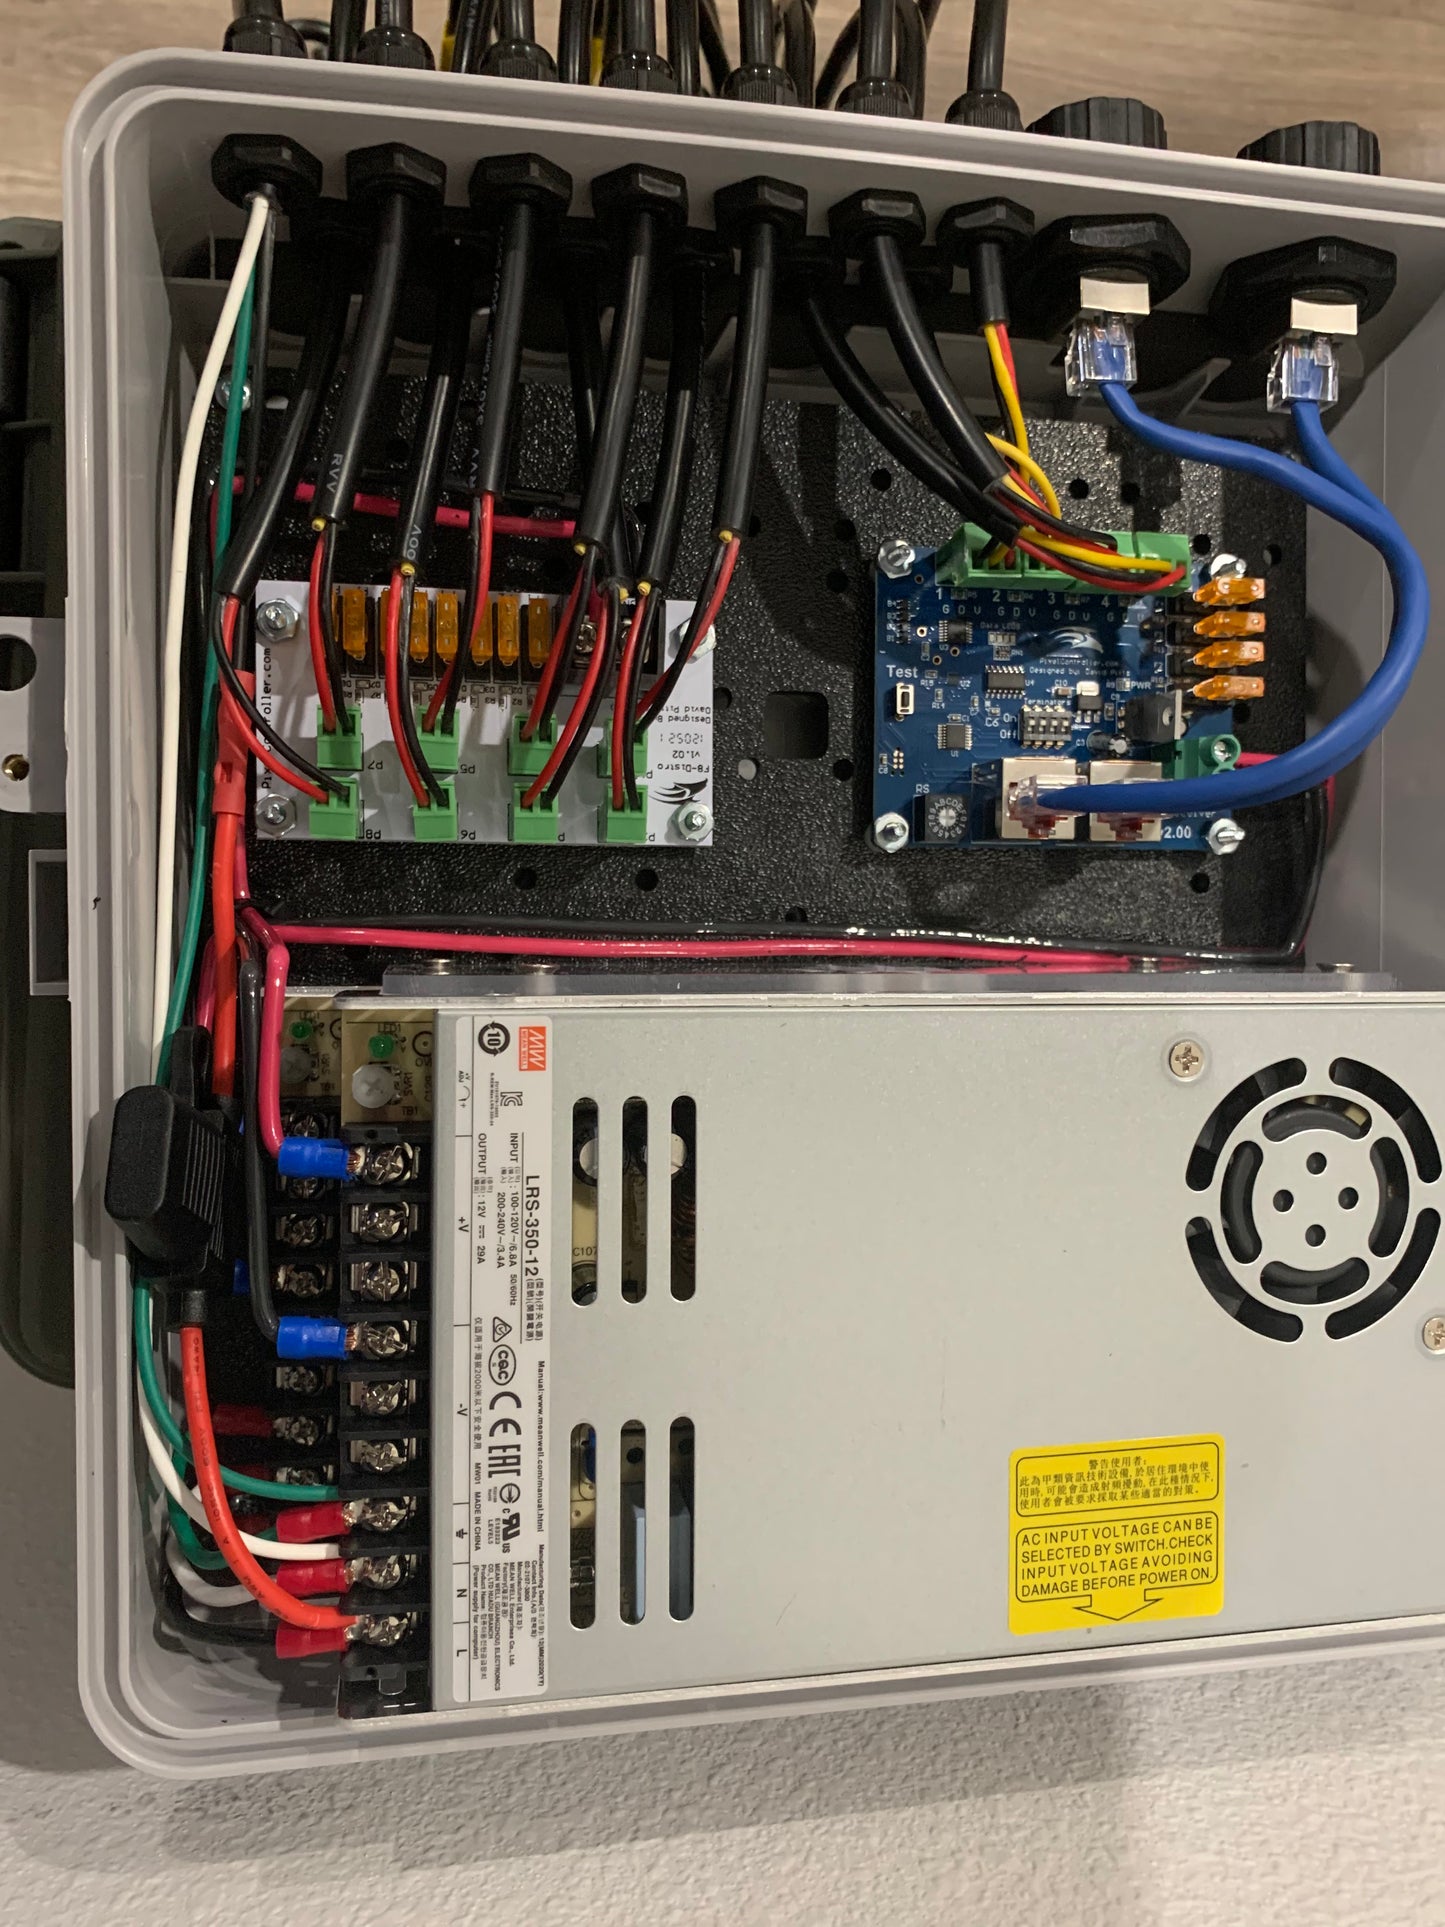 Power Injection in Standard Enclosure